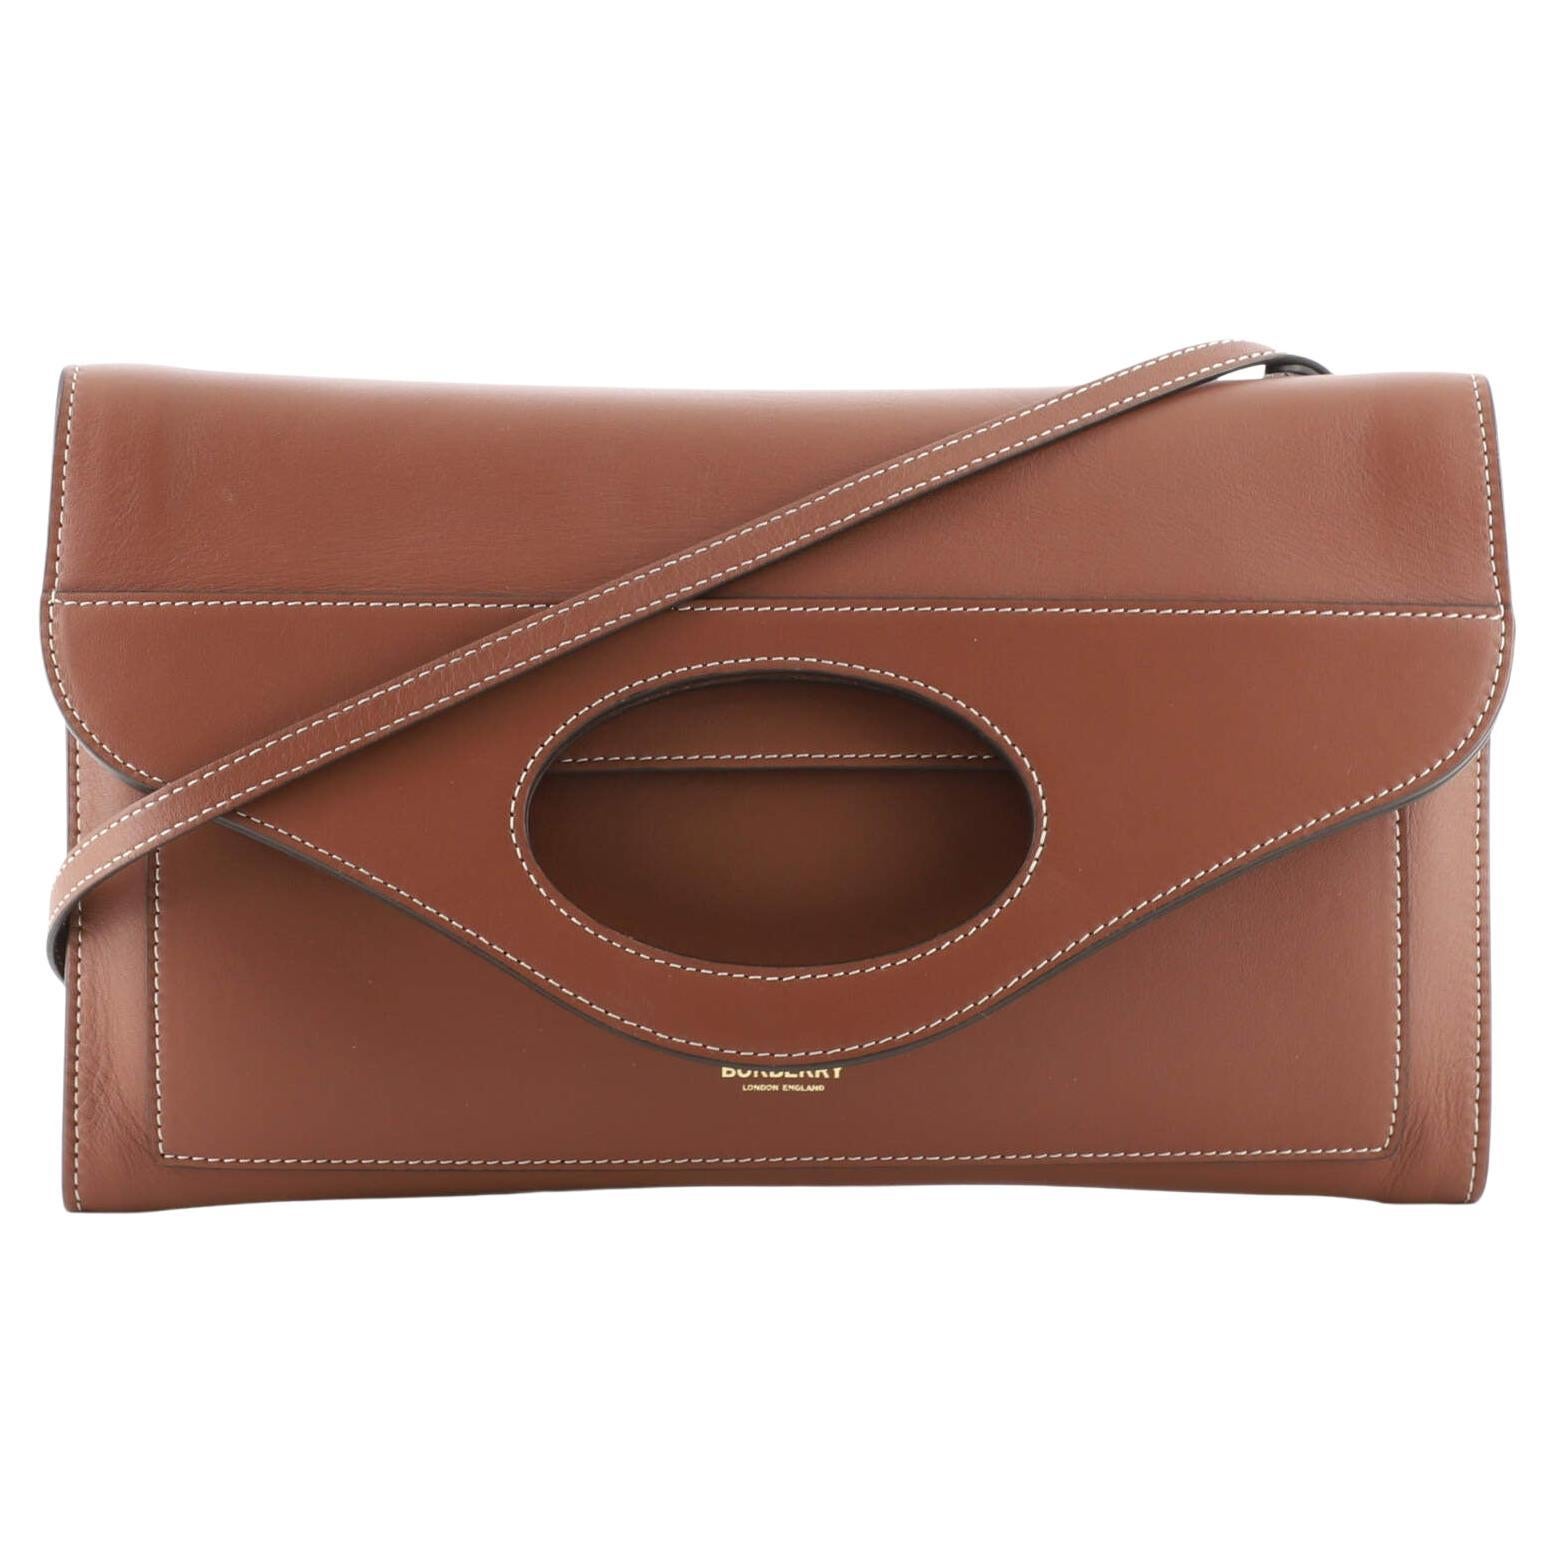 Burberry Convertible Fold Over Pocket Clutch Leather Small